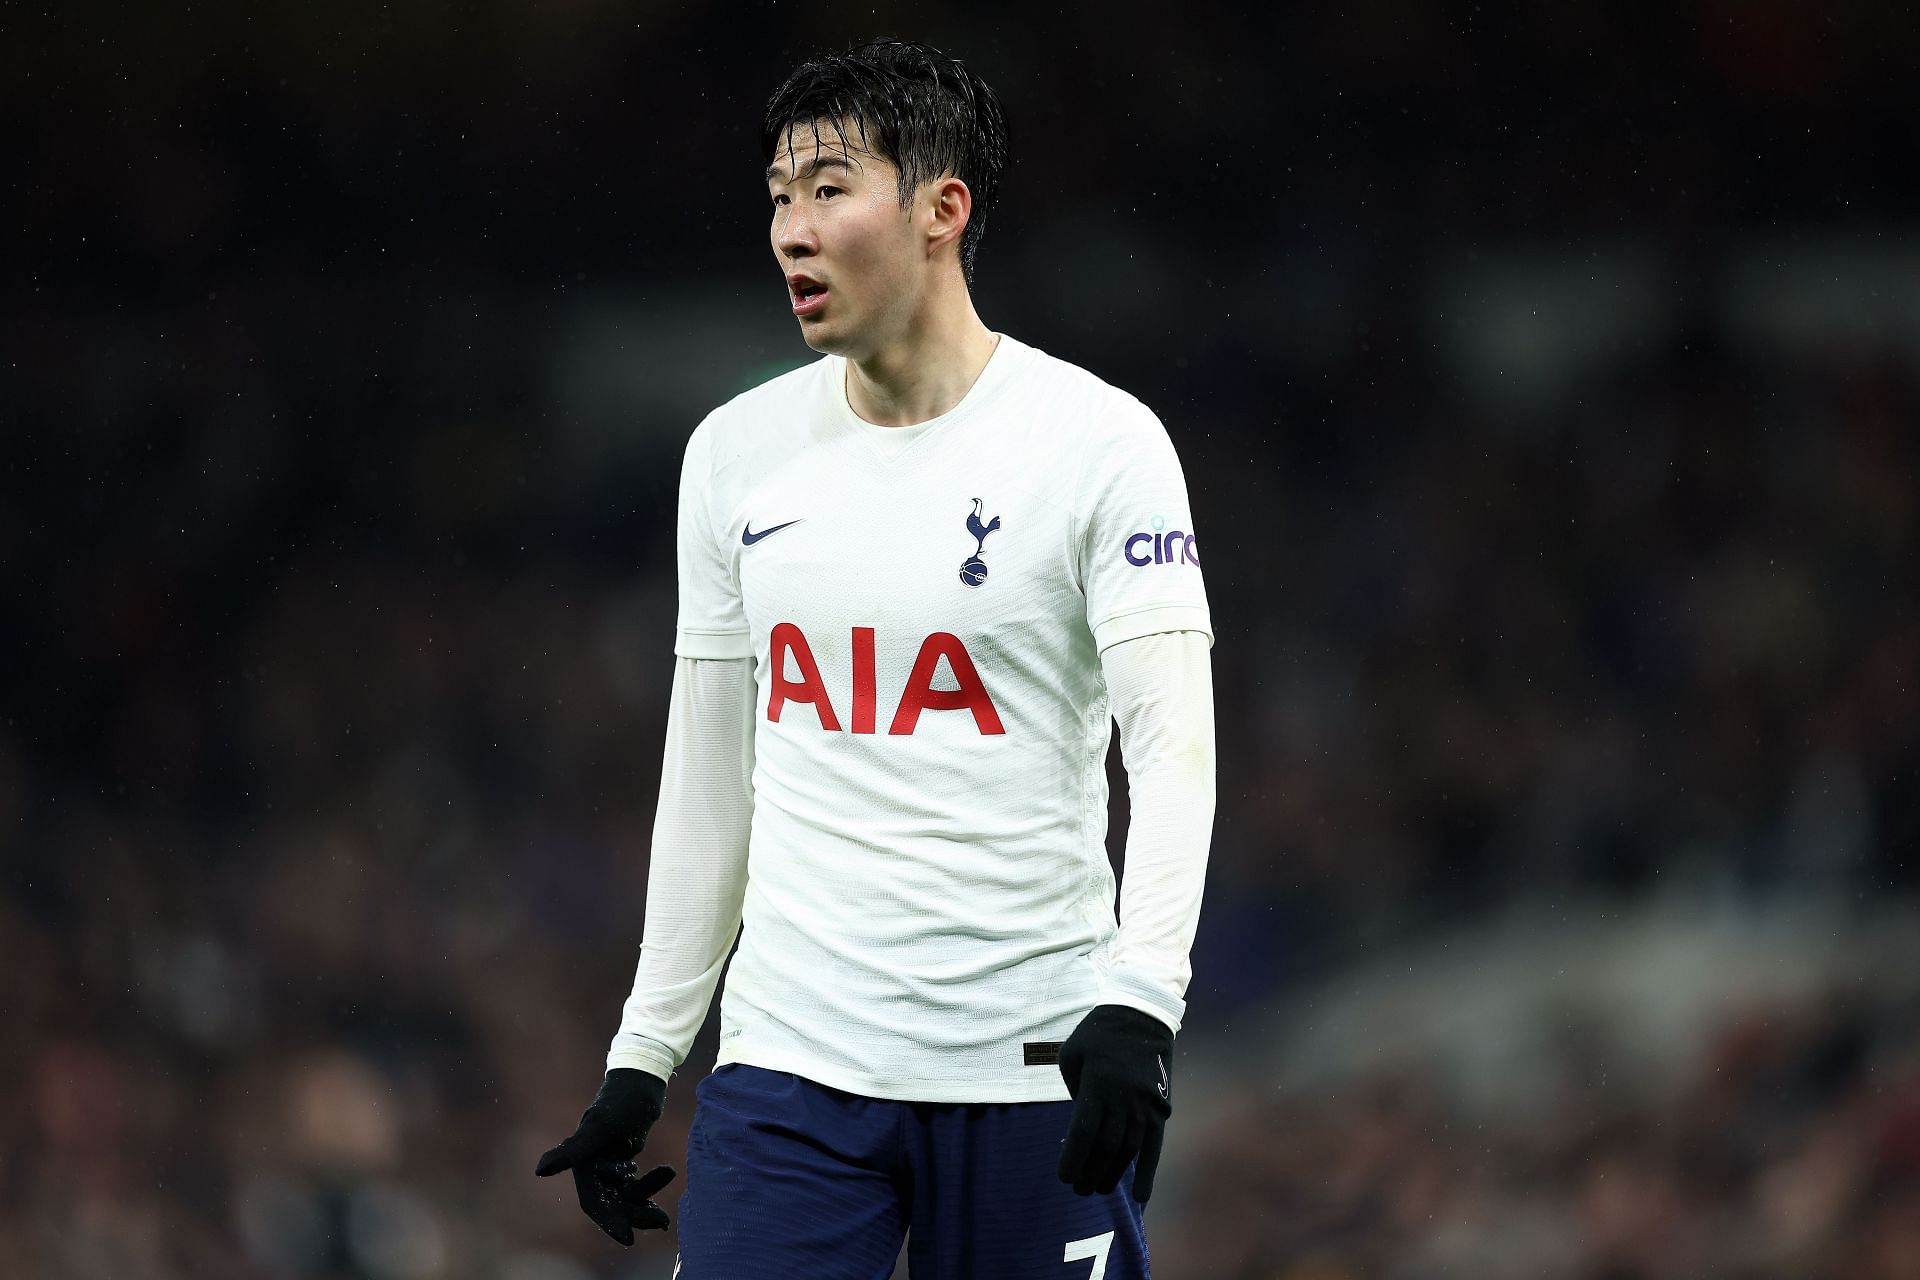 Heung-Min Son has a solid player for Spurs.